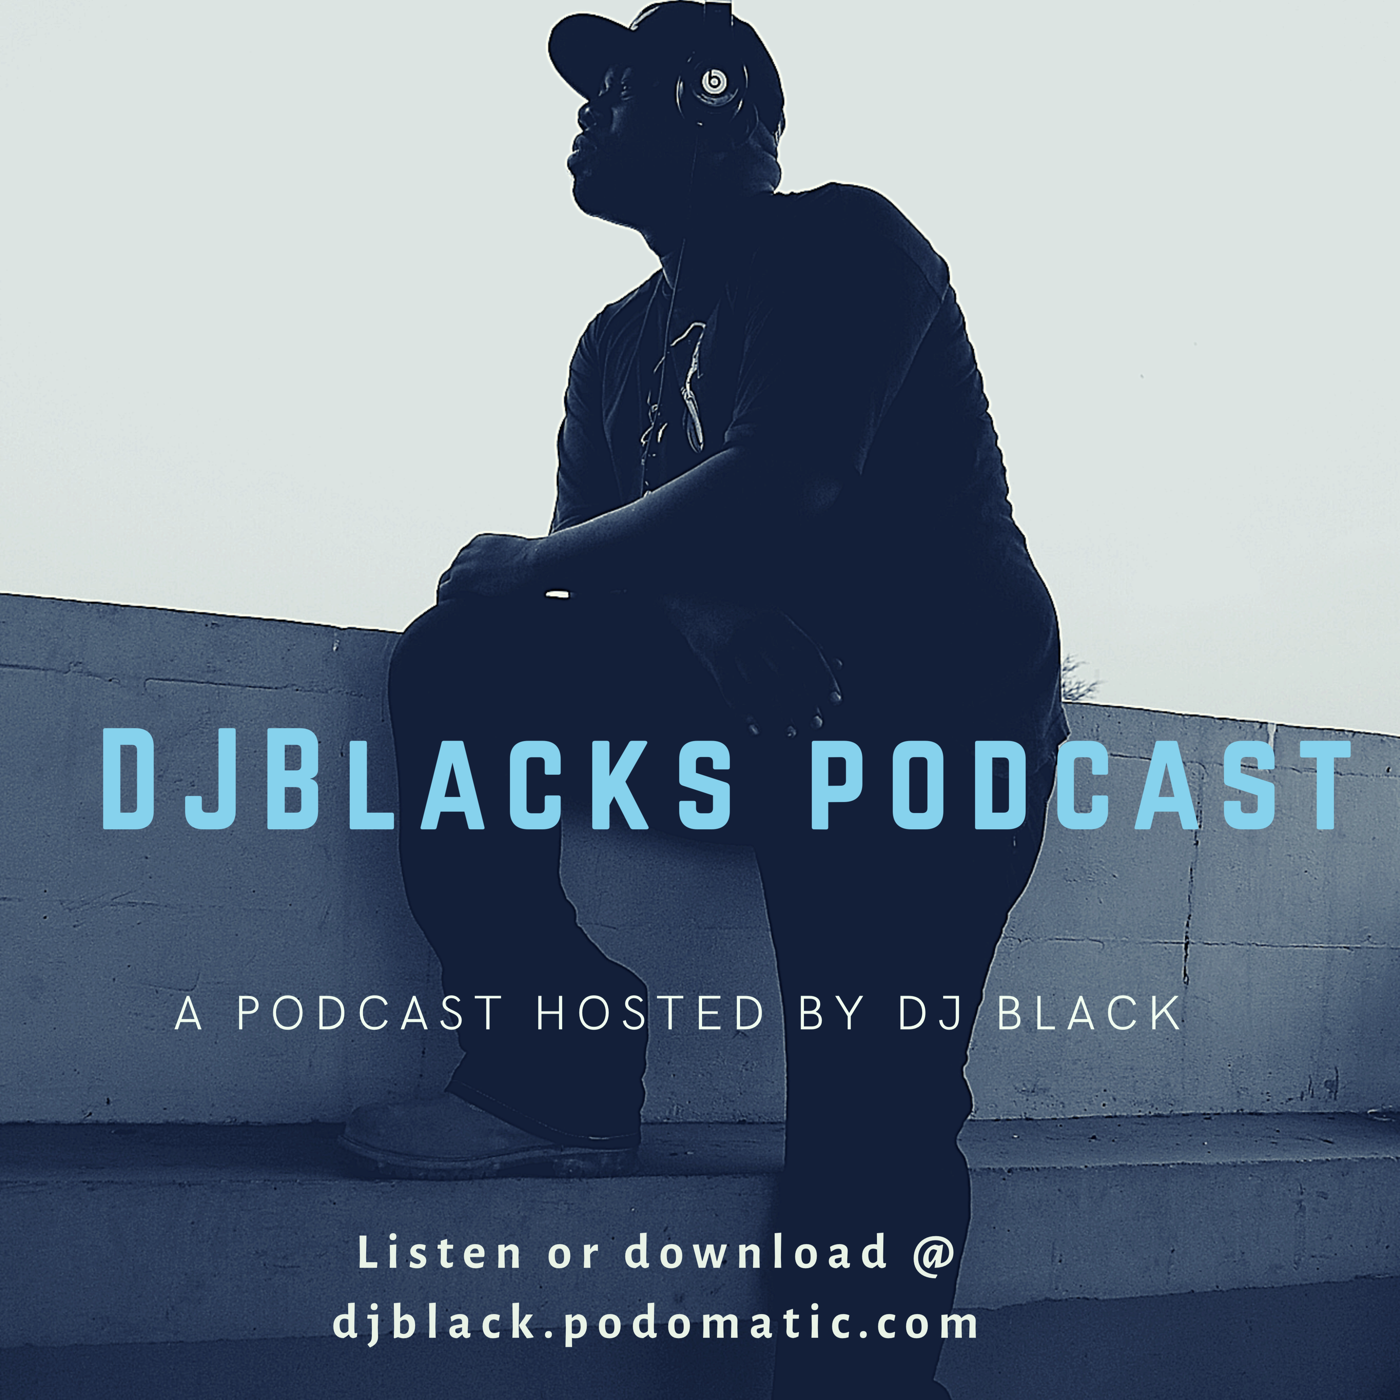 Berris Smith and HiPost feature on DJ Black’s podcast